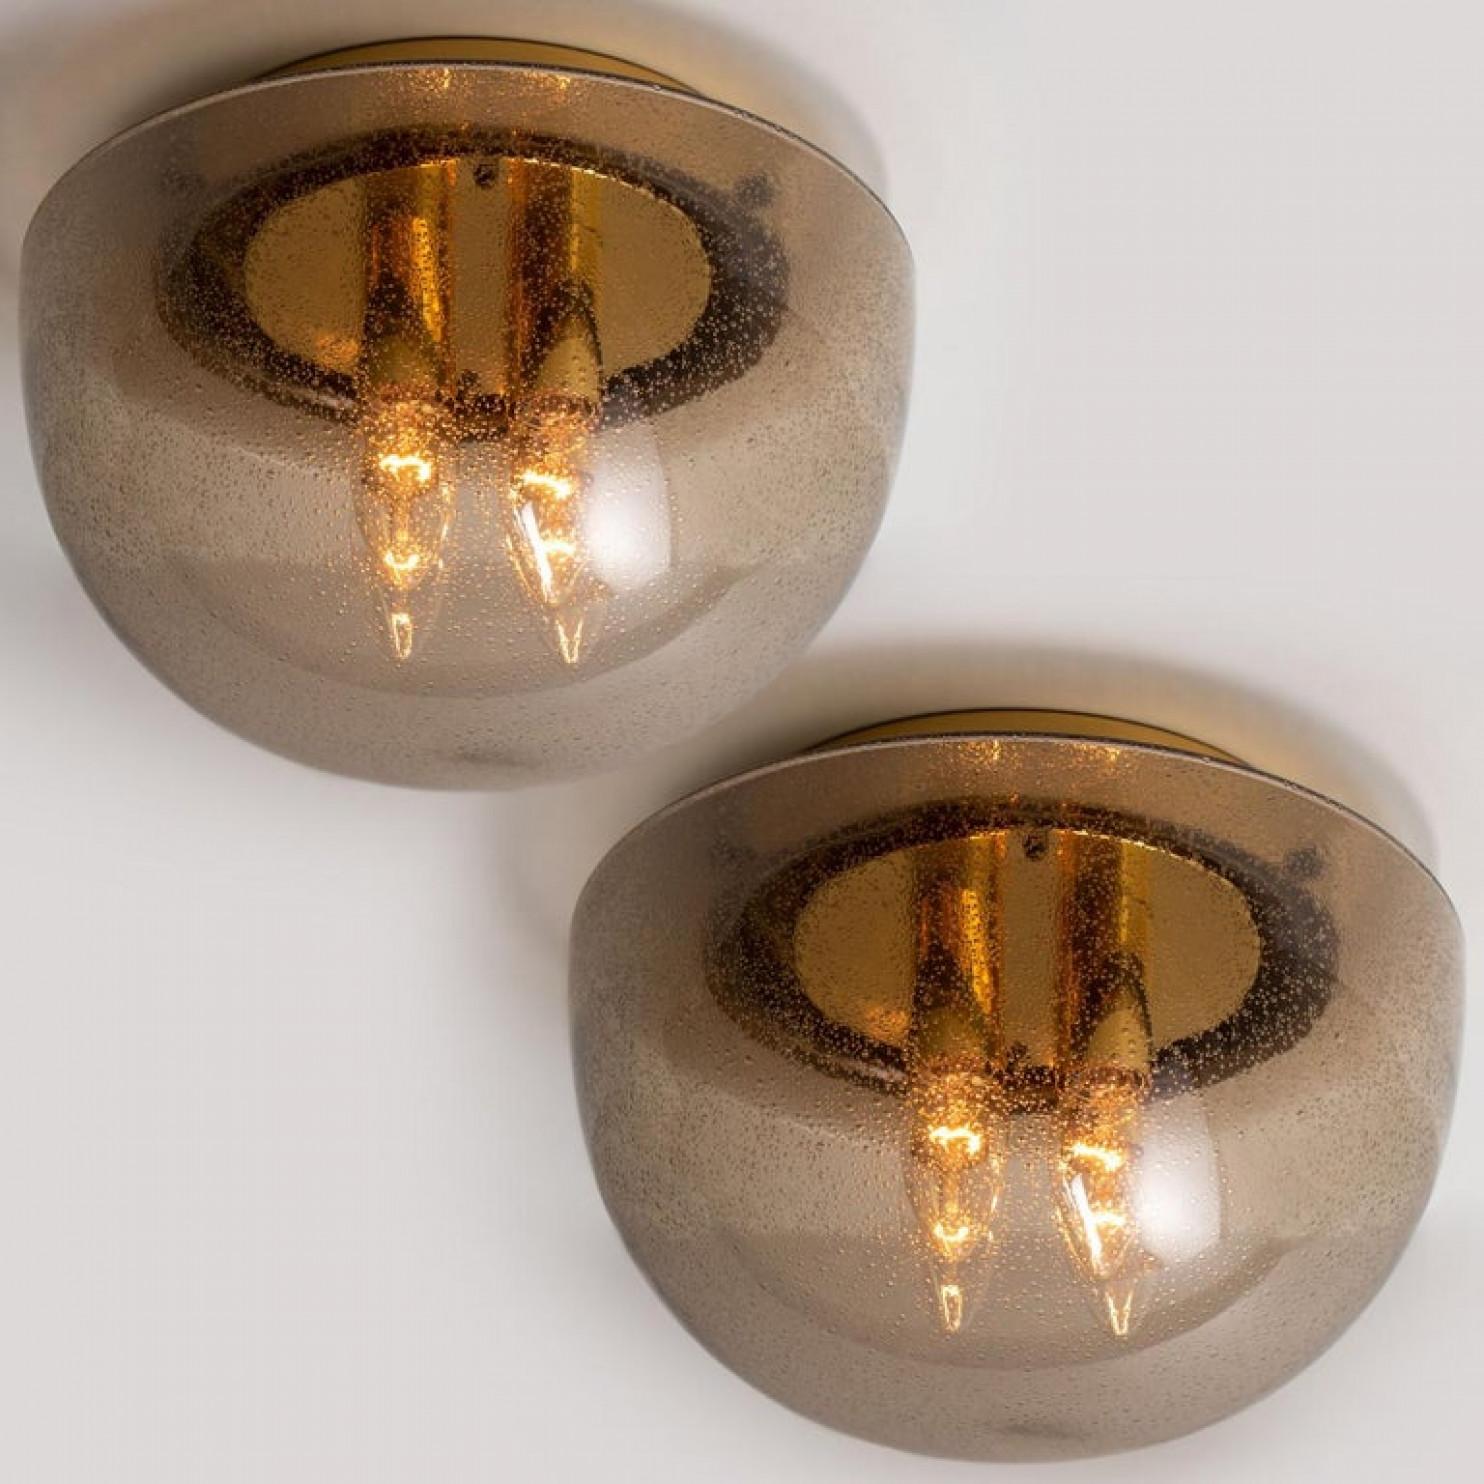 A wonderful mushroom shape flush mount, circa 1970, made by Limburg Leuchten, Germany.
With hand blown smoked glass on brass base. Illuminate4s beautifully.

Dimensions: Height approximate 5.9 inch (15 cm), diameter approximate 11.8 inch (30